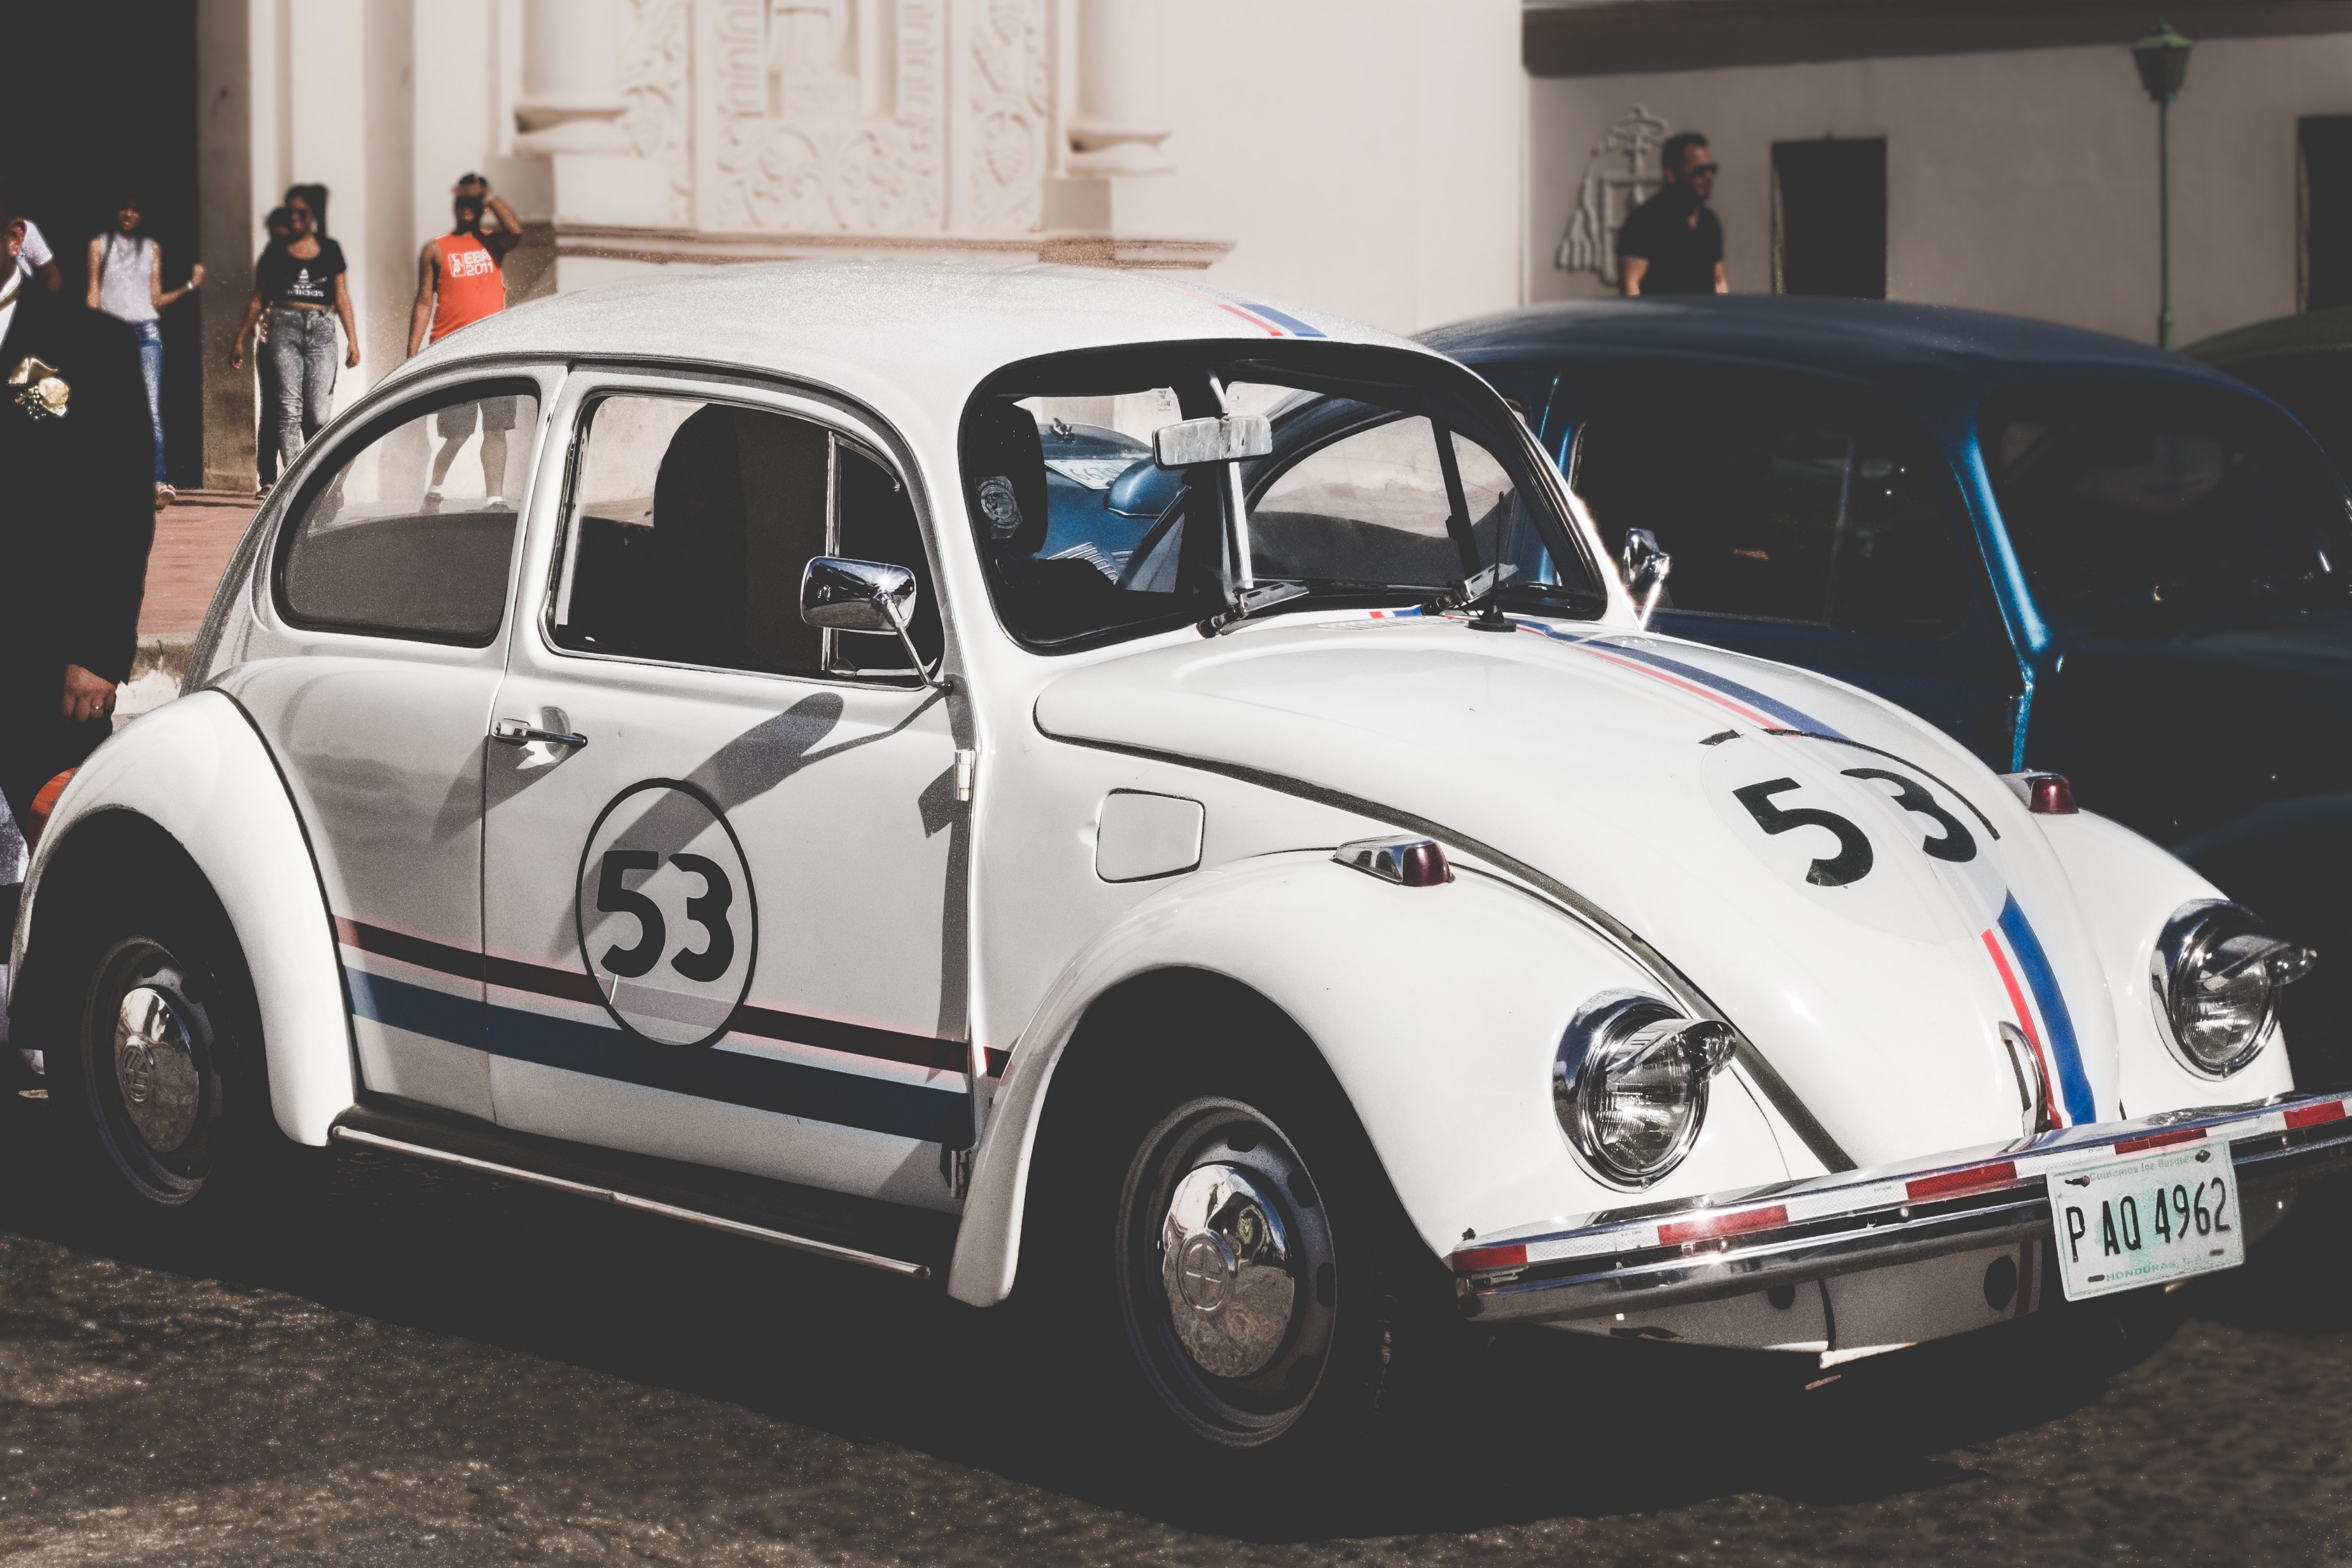 Beetle Numbered 53 With Stripes Showcased On The Street - Herbie The Love Bug Timeline , HD Wallpaper & Backgrounds